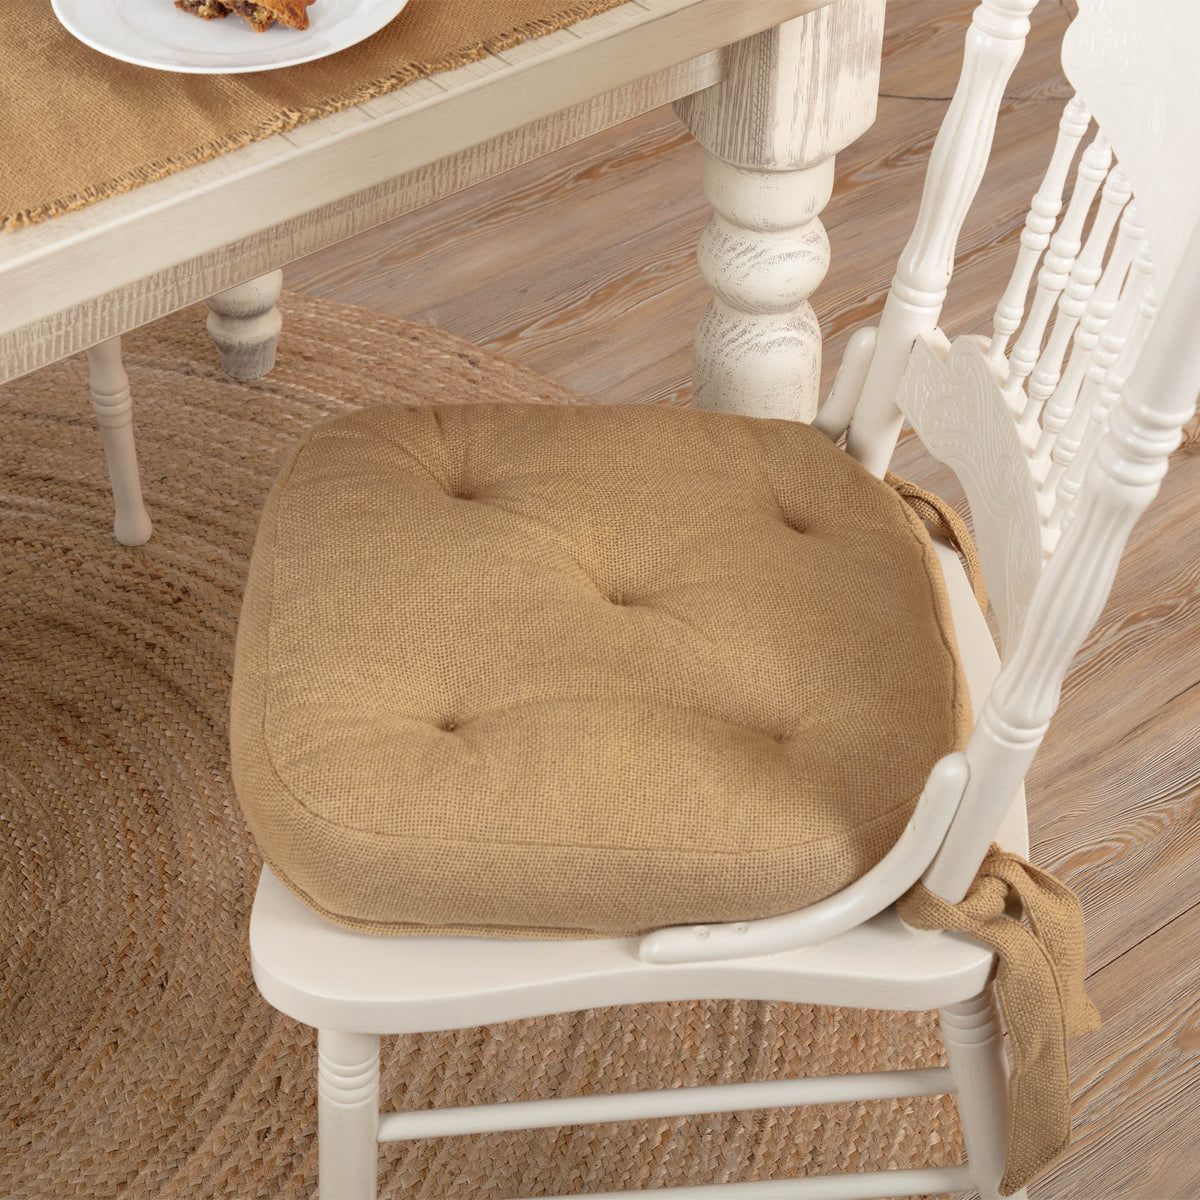 April & Olive Burlap Natural Chair Pad By VHC Brands